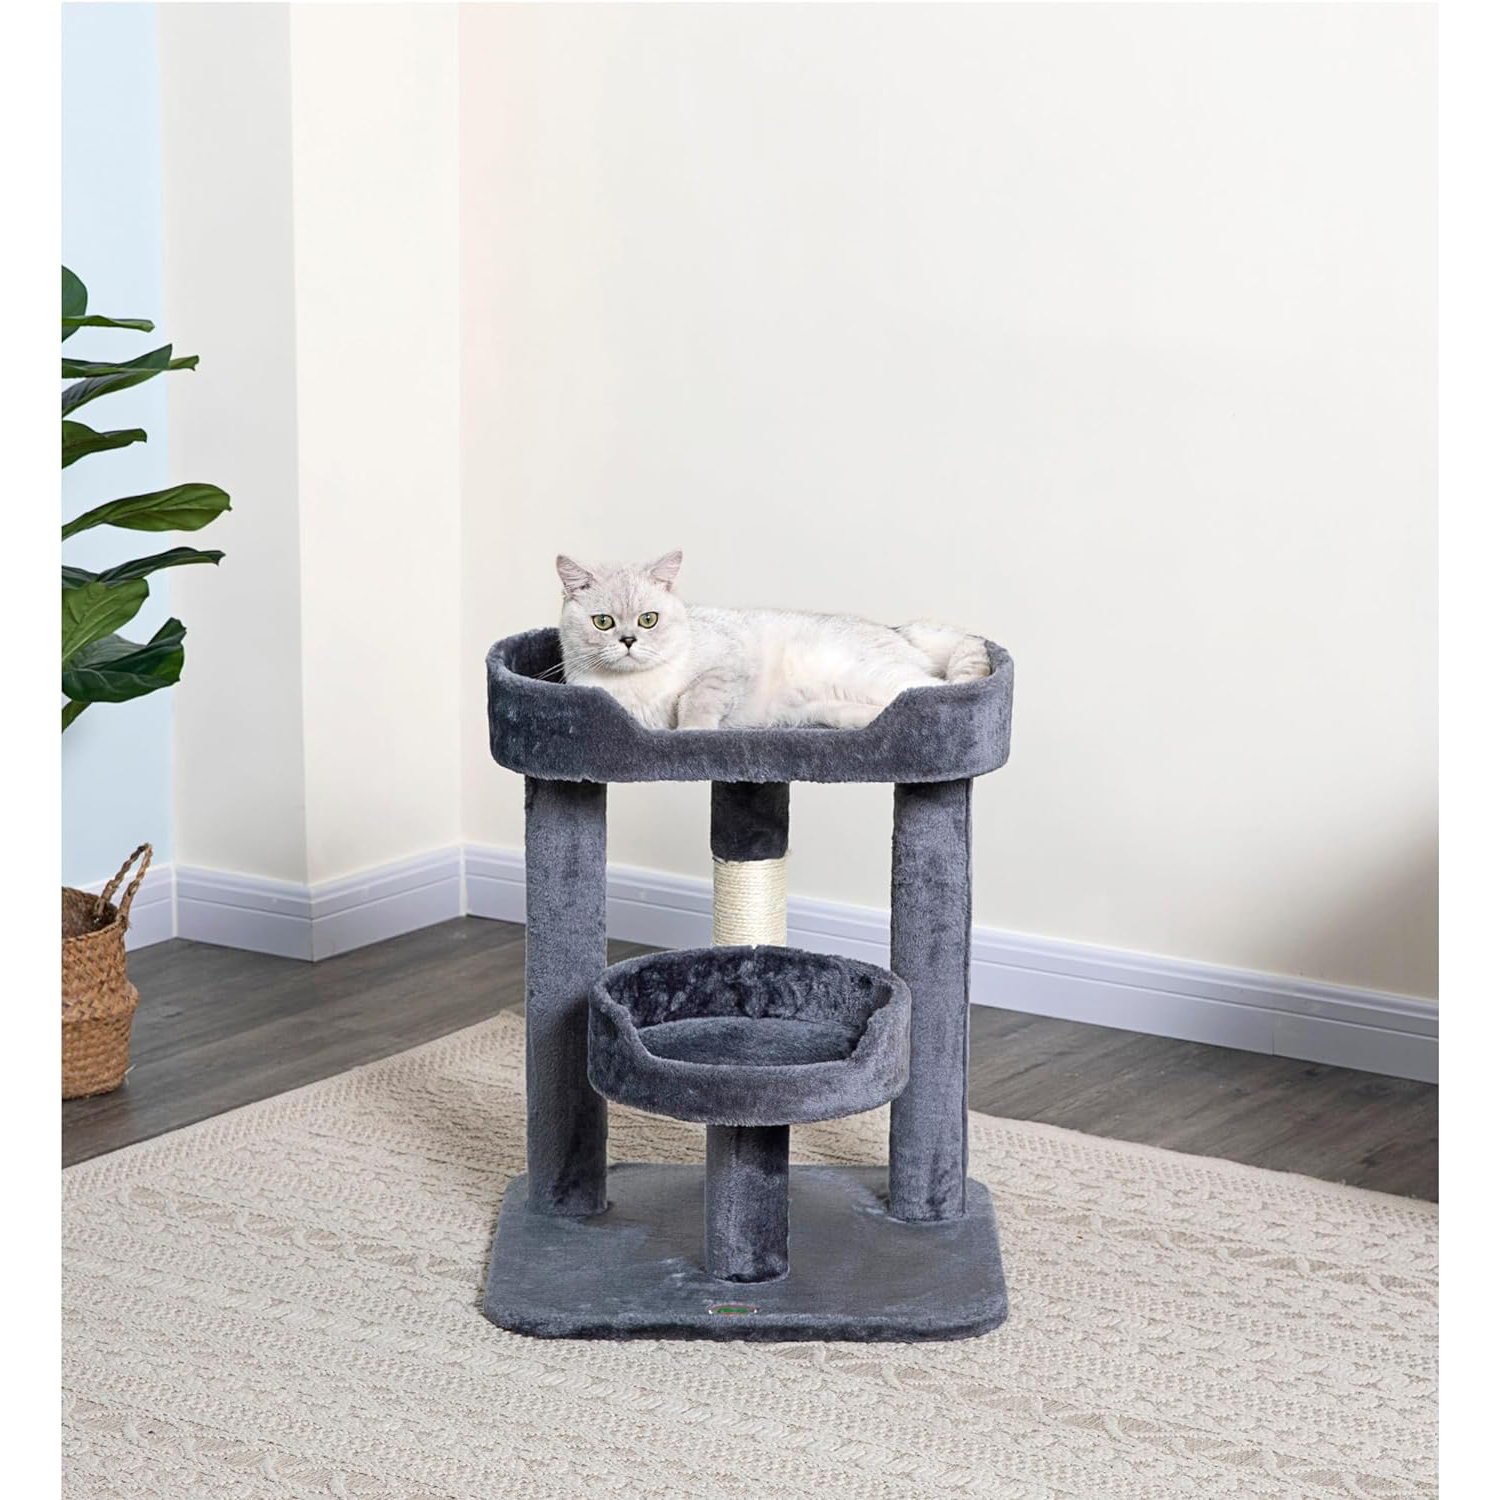 Go Pet Club 23_ Cat Tree Scratcher Kitty Condo Kitten Furniture with Two Elevated Perch Beds and Large Base for Indoor Cats, Gray New